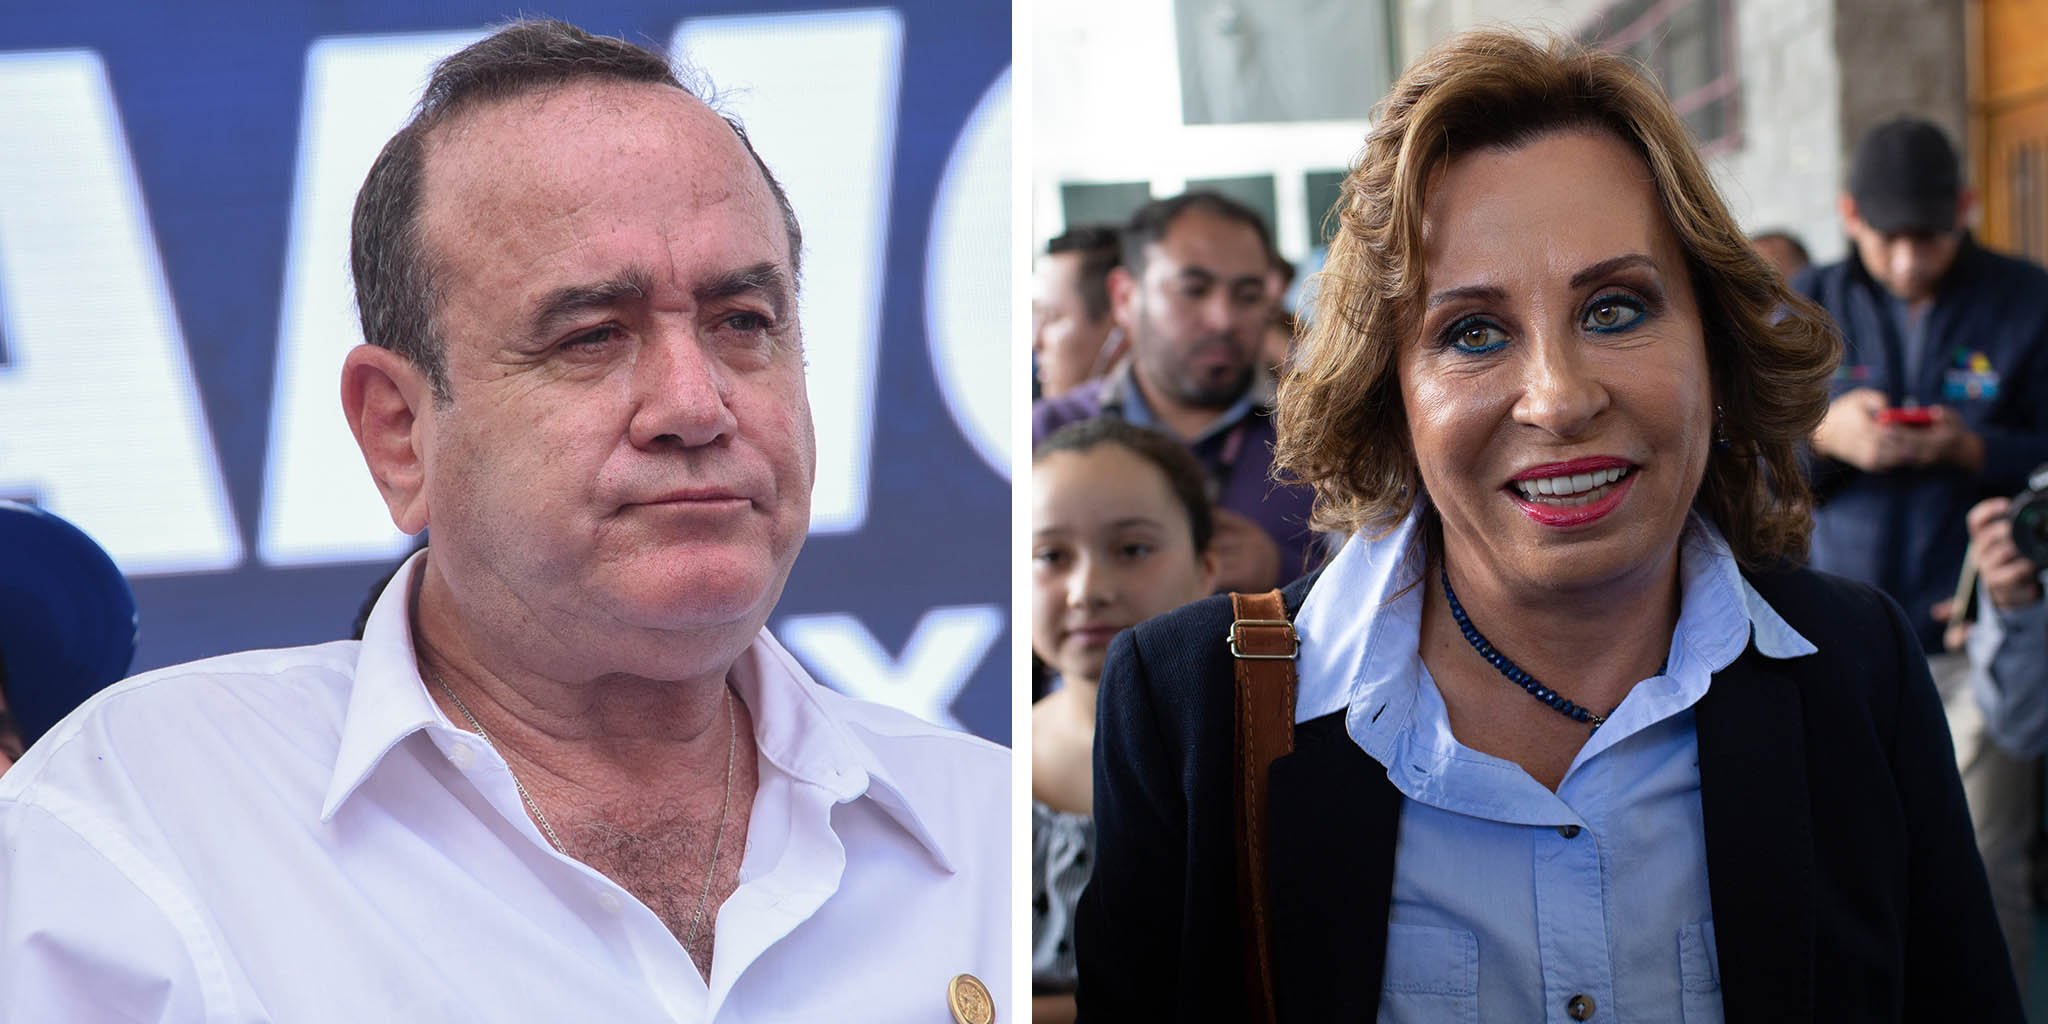 (L) Guatemalan candidate for the Vamos party Alejandro Giammattei attends his campaign closing rally in Guatemala City on August 4, 2019. (R) Sandra Torres, former first lady and presidential candidate for the National Union of Hope (Union Nacional de la Esperanza) party, walks through a polling station after voting in Guatemala City on June 16, 2019. (Orlando Estrada—AFP/Getty Images; James Rodriguez—Bloomberg via Getty Images)